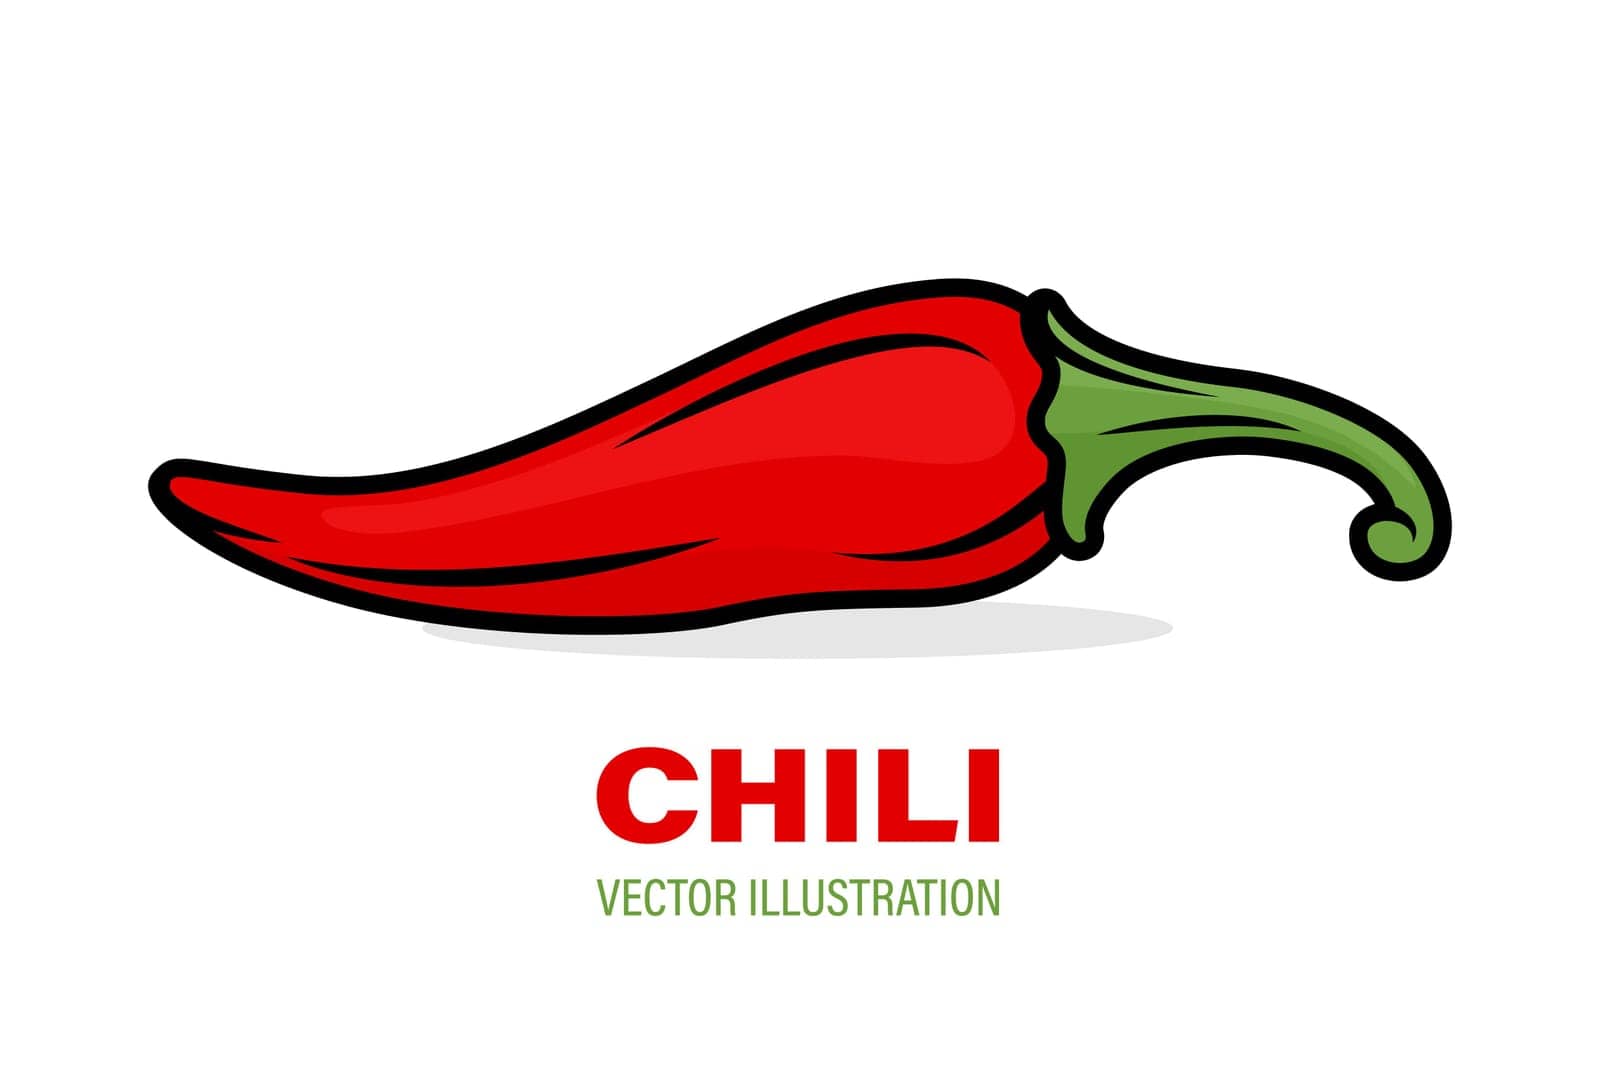 Flat Vector Design Template of Whole Fresh Hot Chili Pepper Closeup Isolated. Spicy Chili Pepper in Front View. Vector Chili Pepper Illustration for Culinary, Cooking, and Spicy Food Concept.